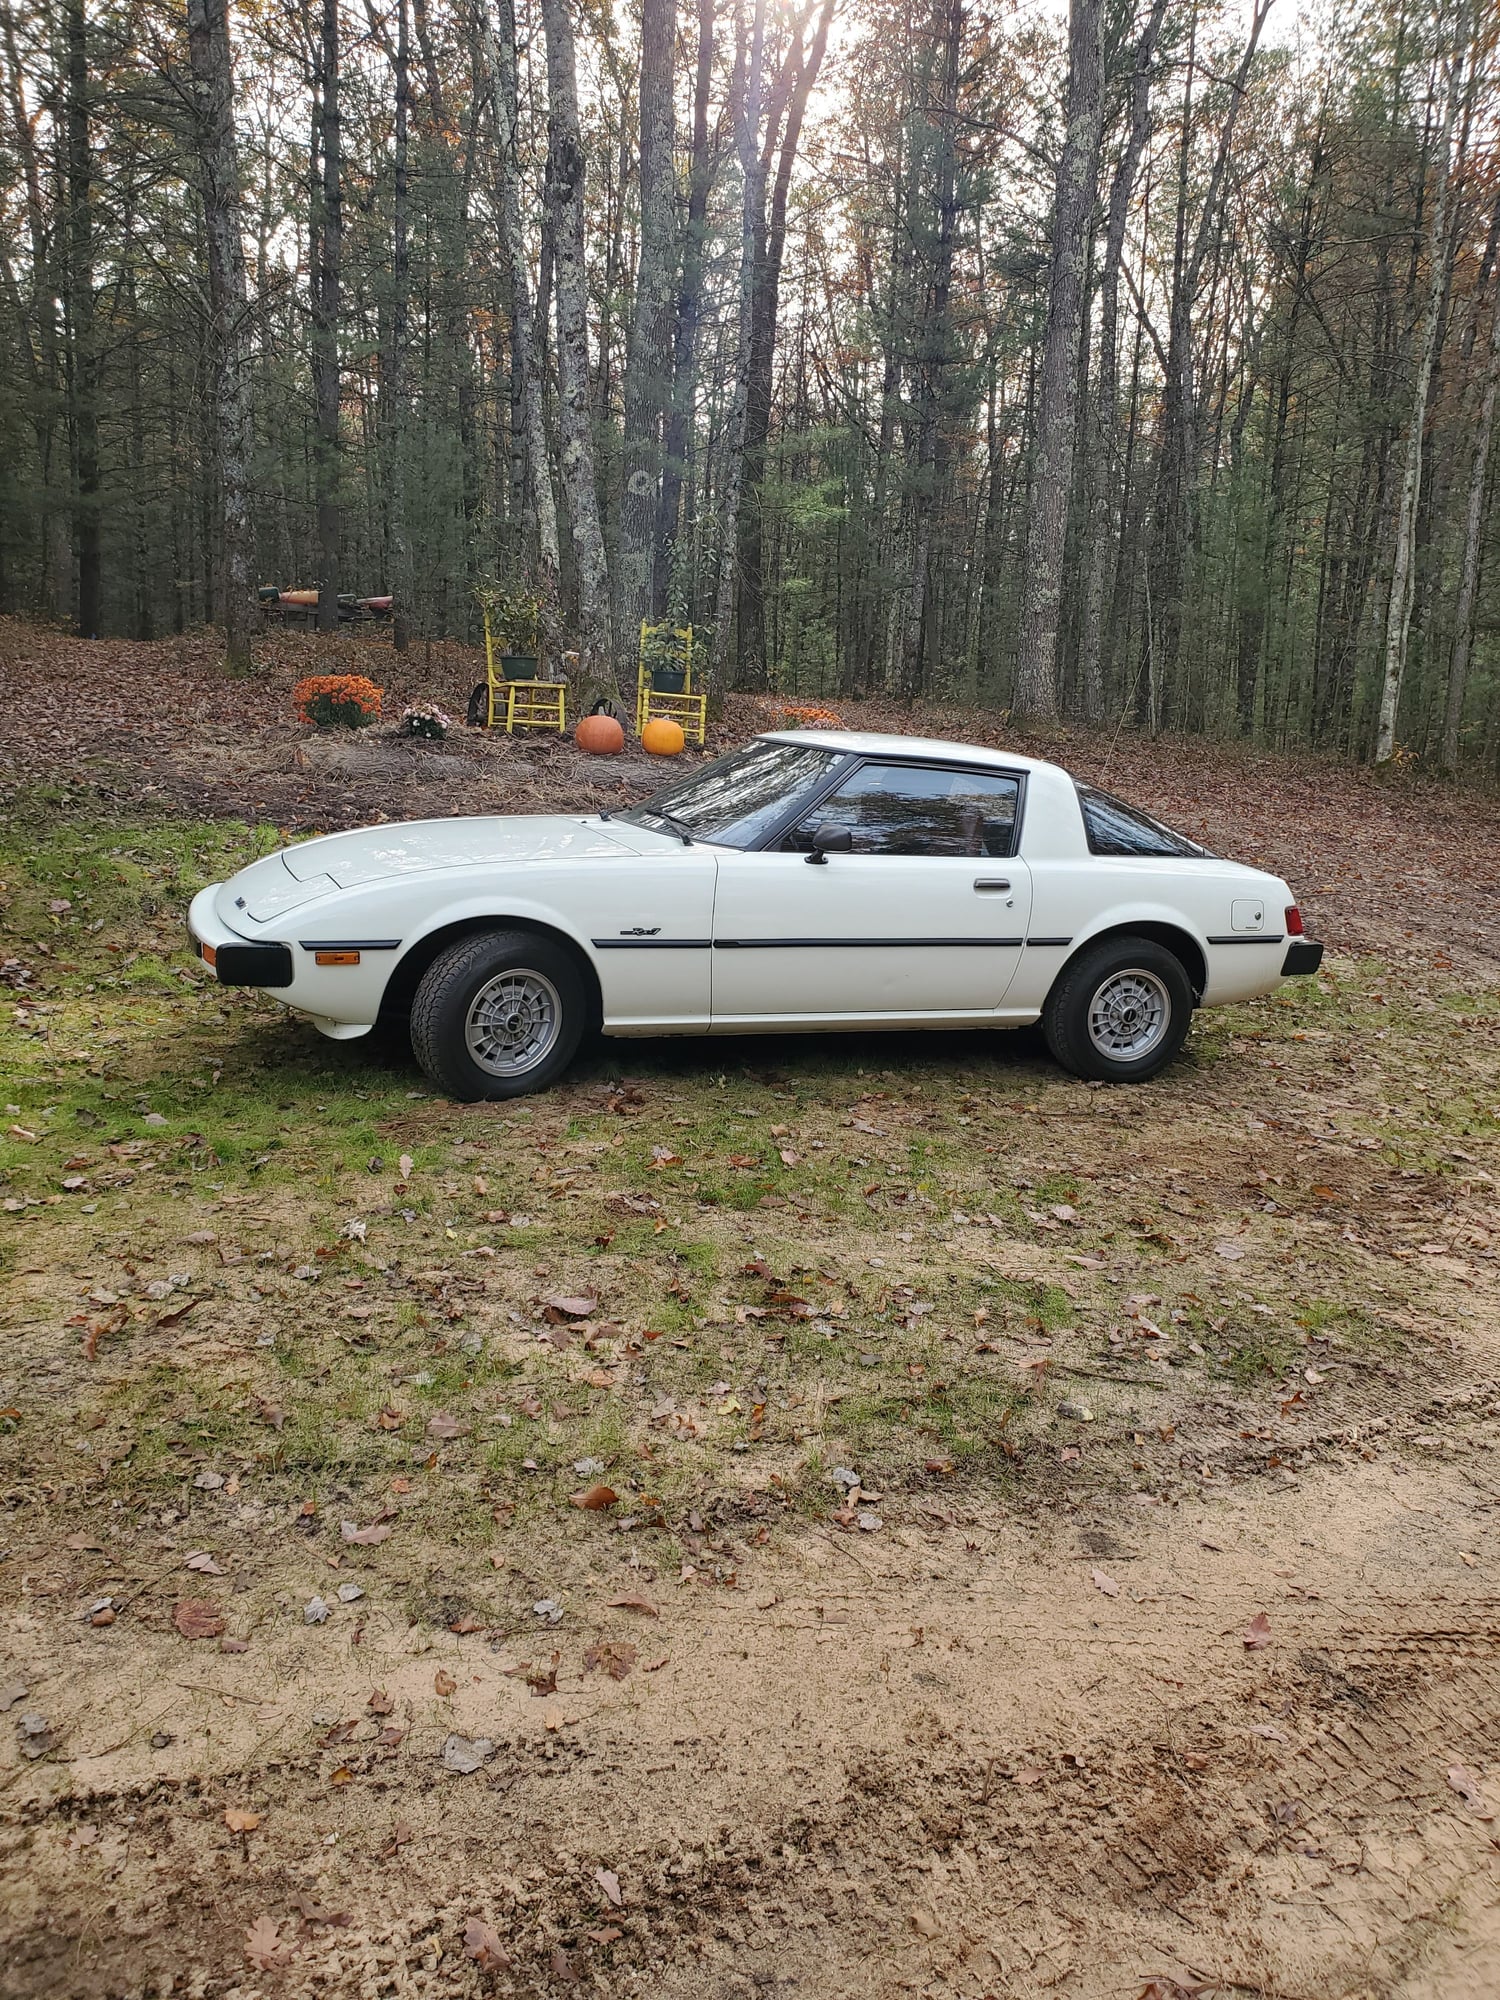 1979 Mazda RX-7 - One Owner - Used - VIN SA22C510770 - 71,800 Miles - Other - 2WD - Manual - Hatchback - White - Irons, MI 49644, United States